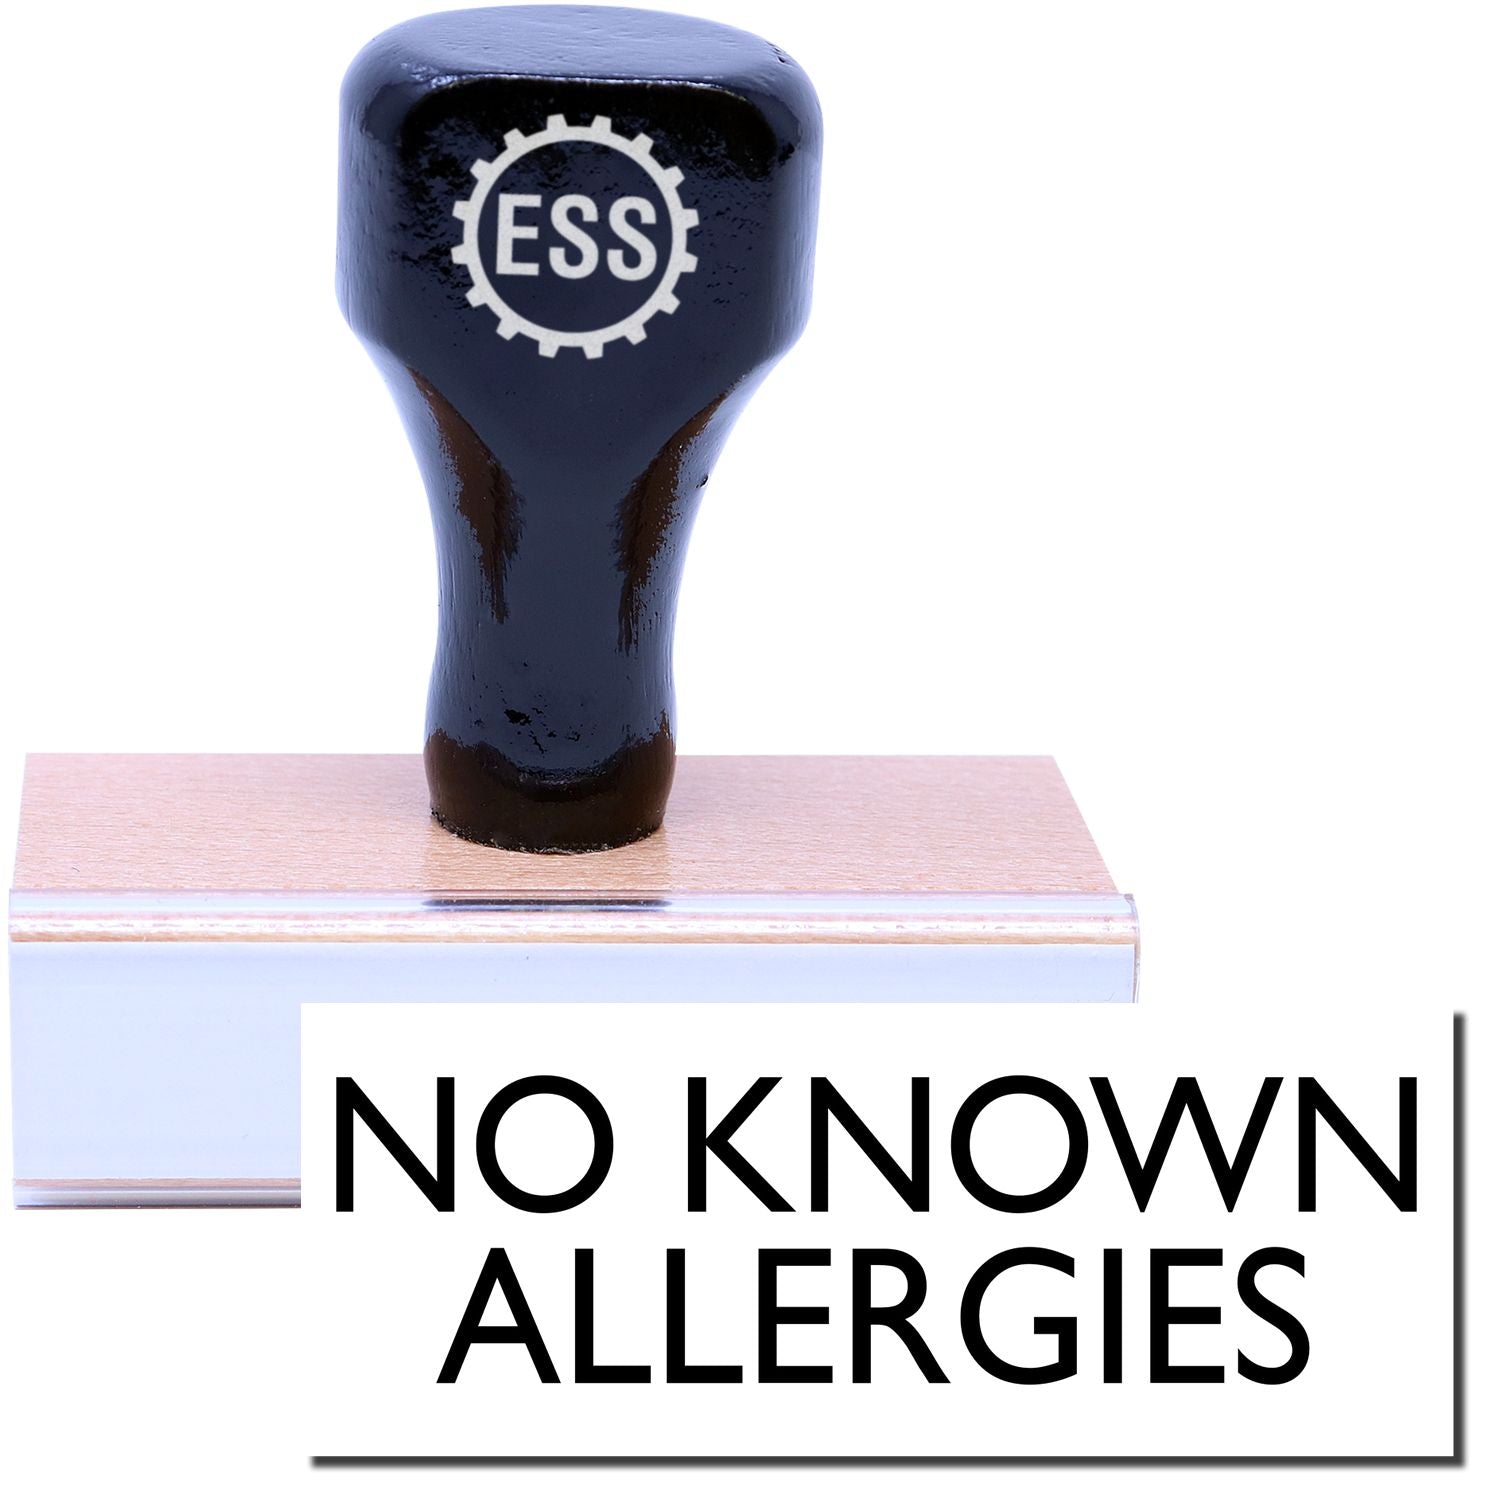 A stock office rubber stamp with a stamped image showing how the text "NO KNOWN ALLERGIES" in a large font is displayed after stamping.